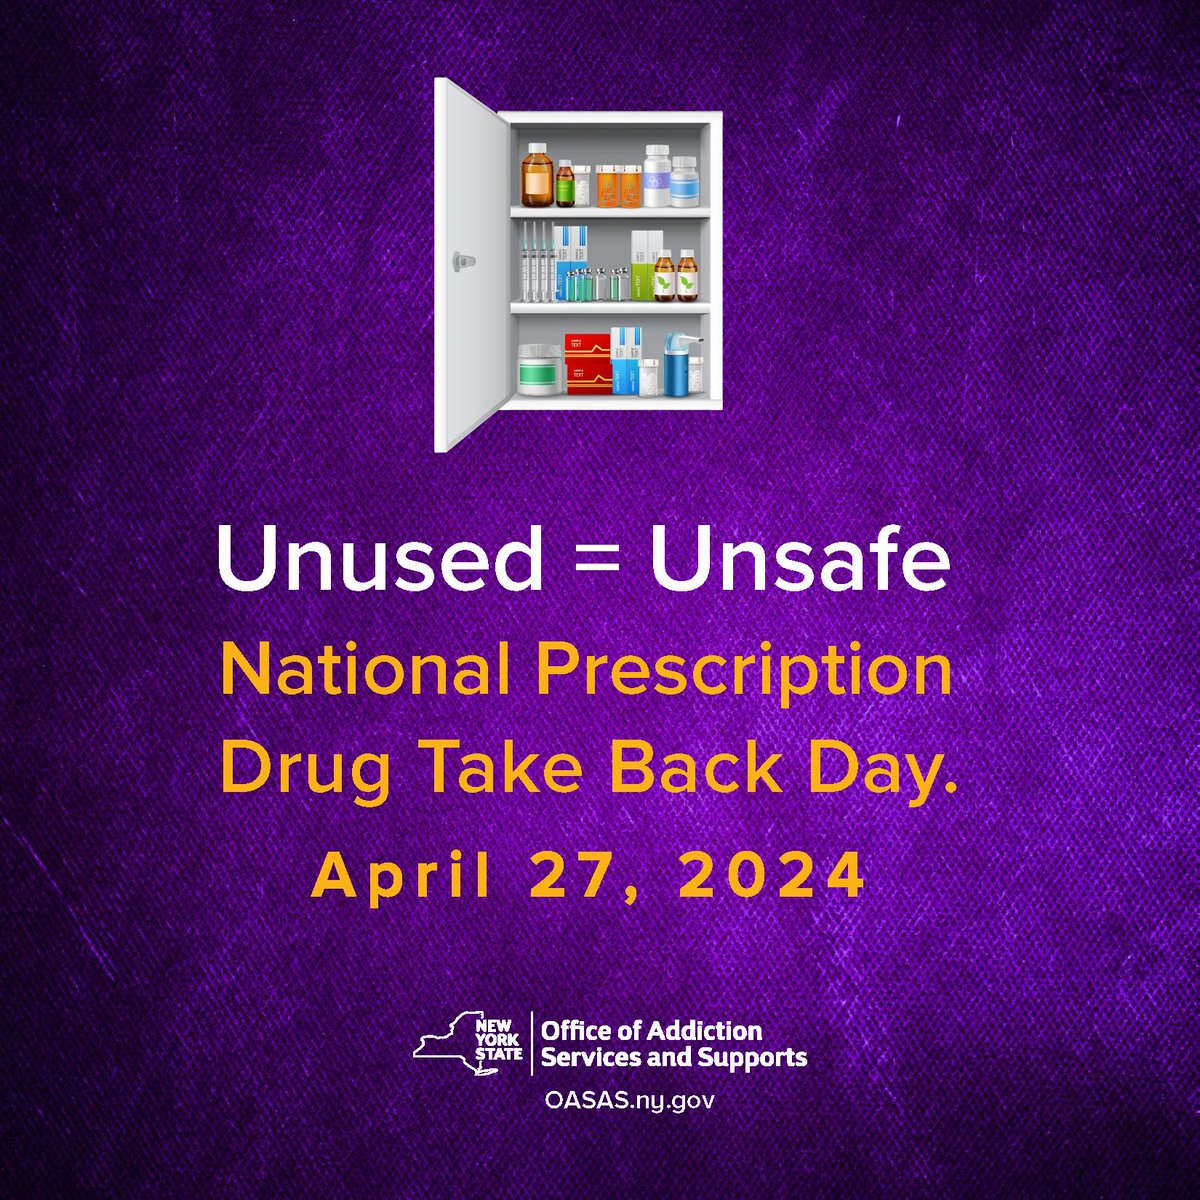 Reminder: Bring your unneeded medication to a nearby collection site TODAY (April 27) from 10 a.m. to 2 p.m. as part of National Prescription Drug #TakeBackDay. Help prevent misuse and create a safer world. Details at oasas.ny.gov/event/national…